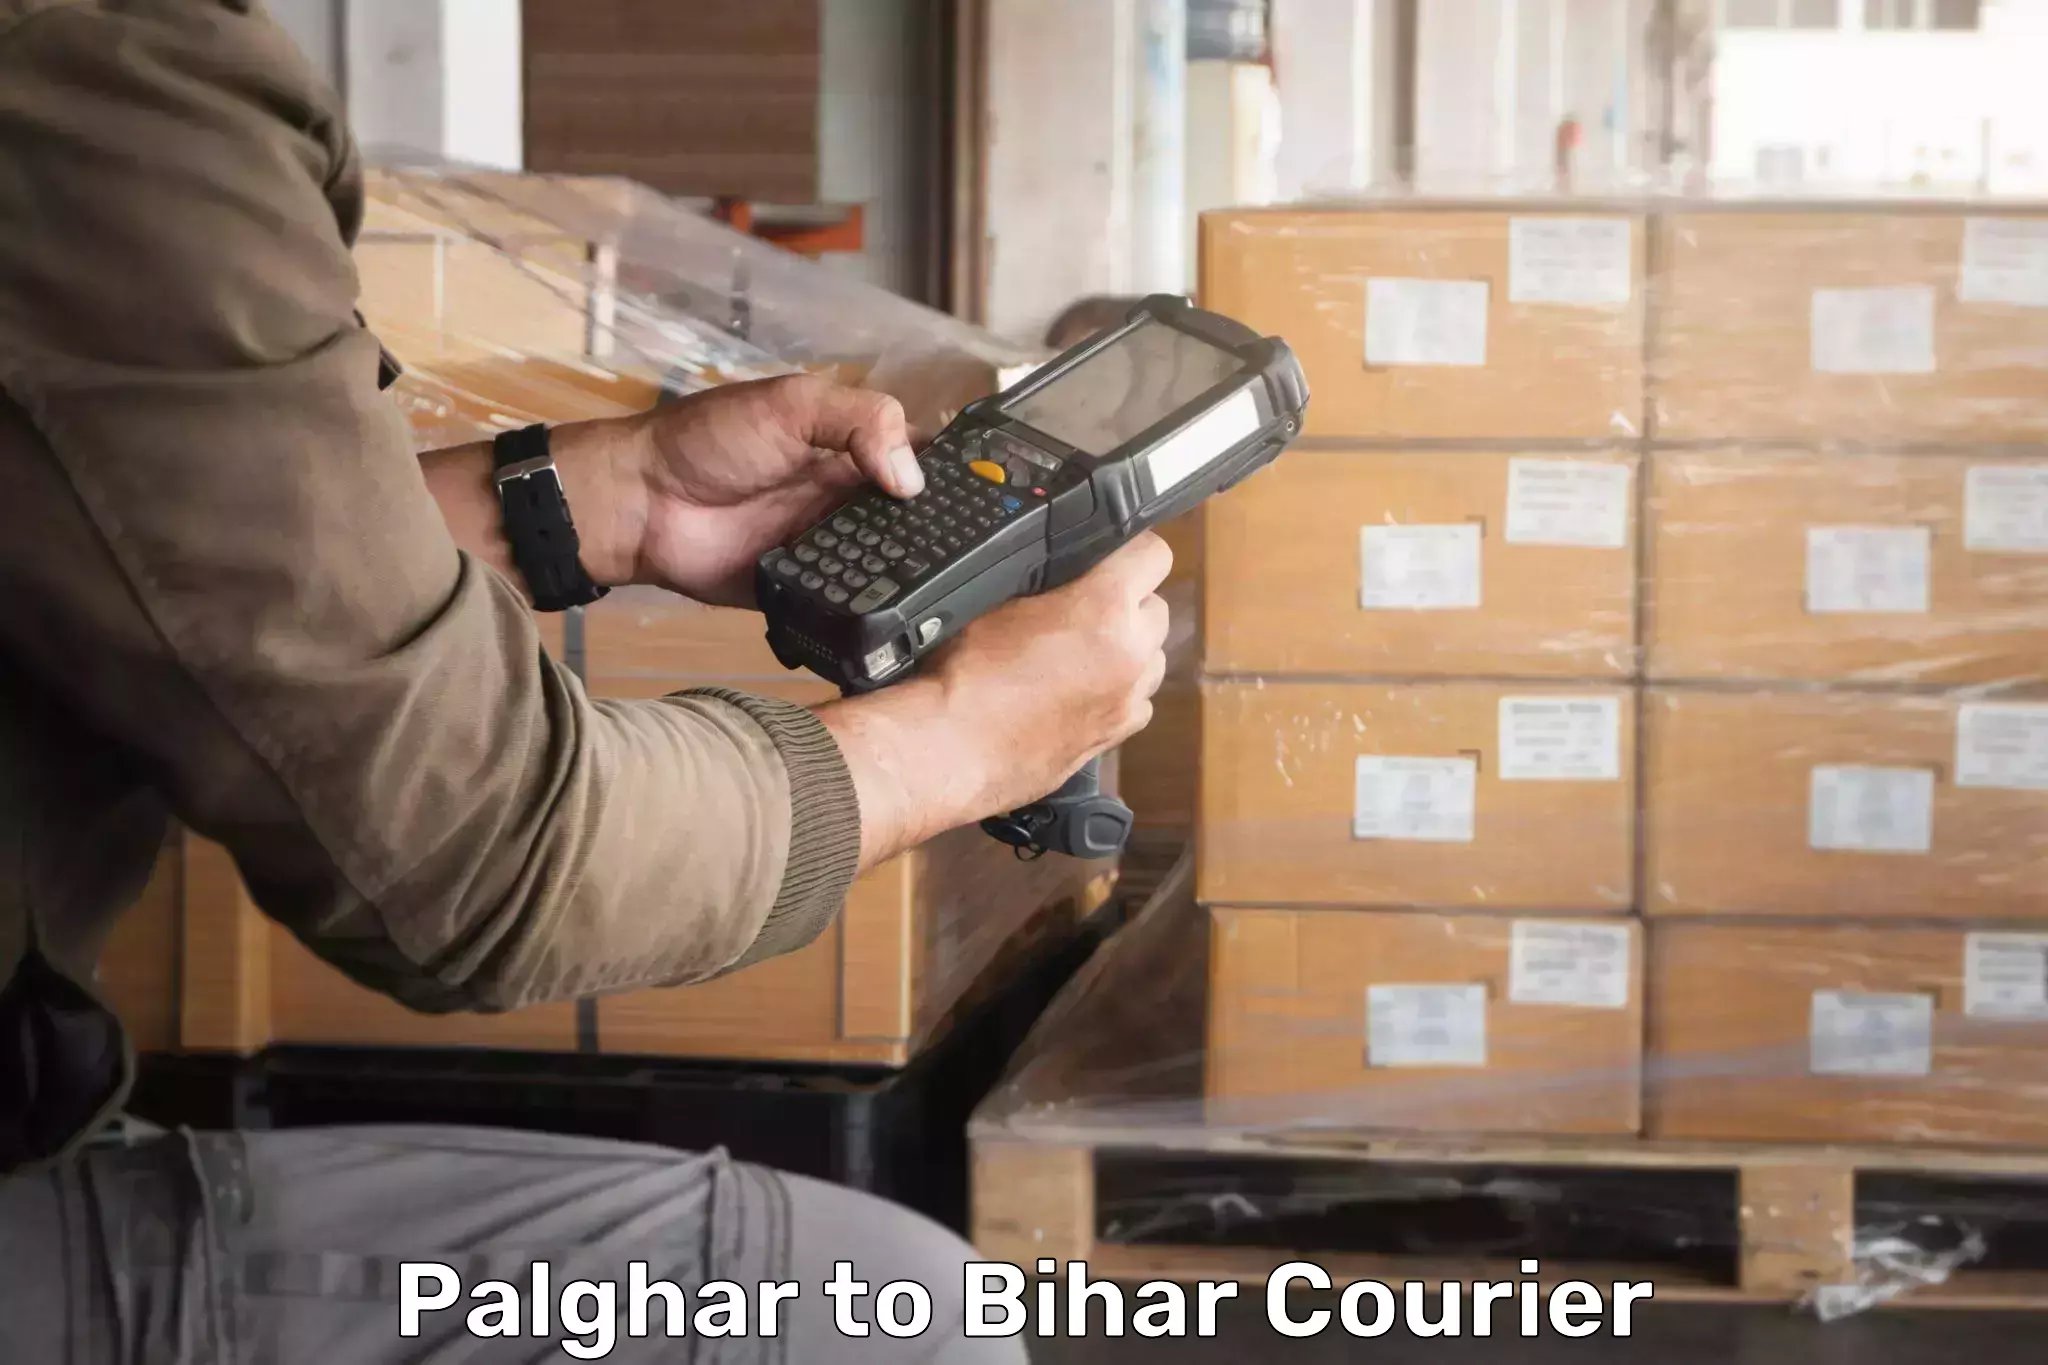 Express delivery network Palghar to Bihar